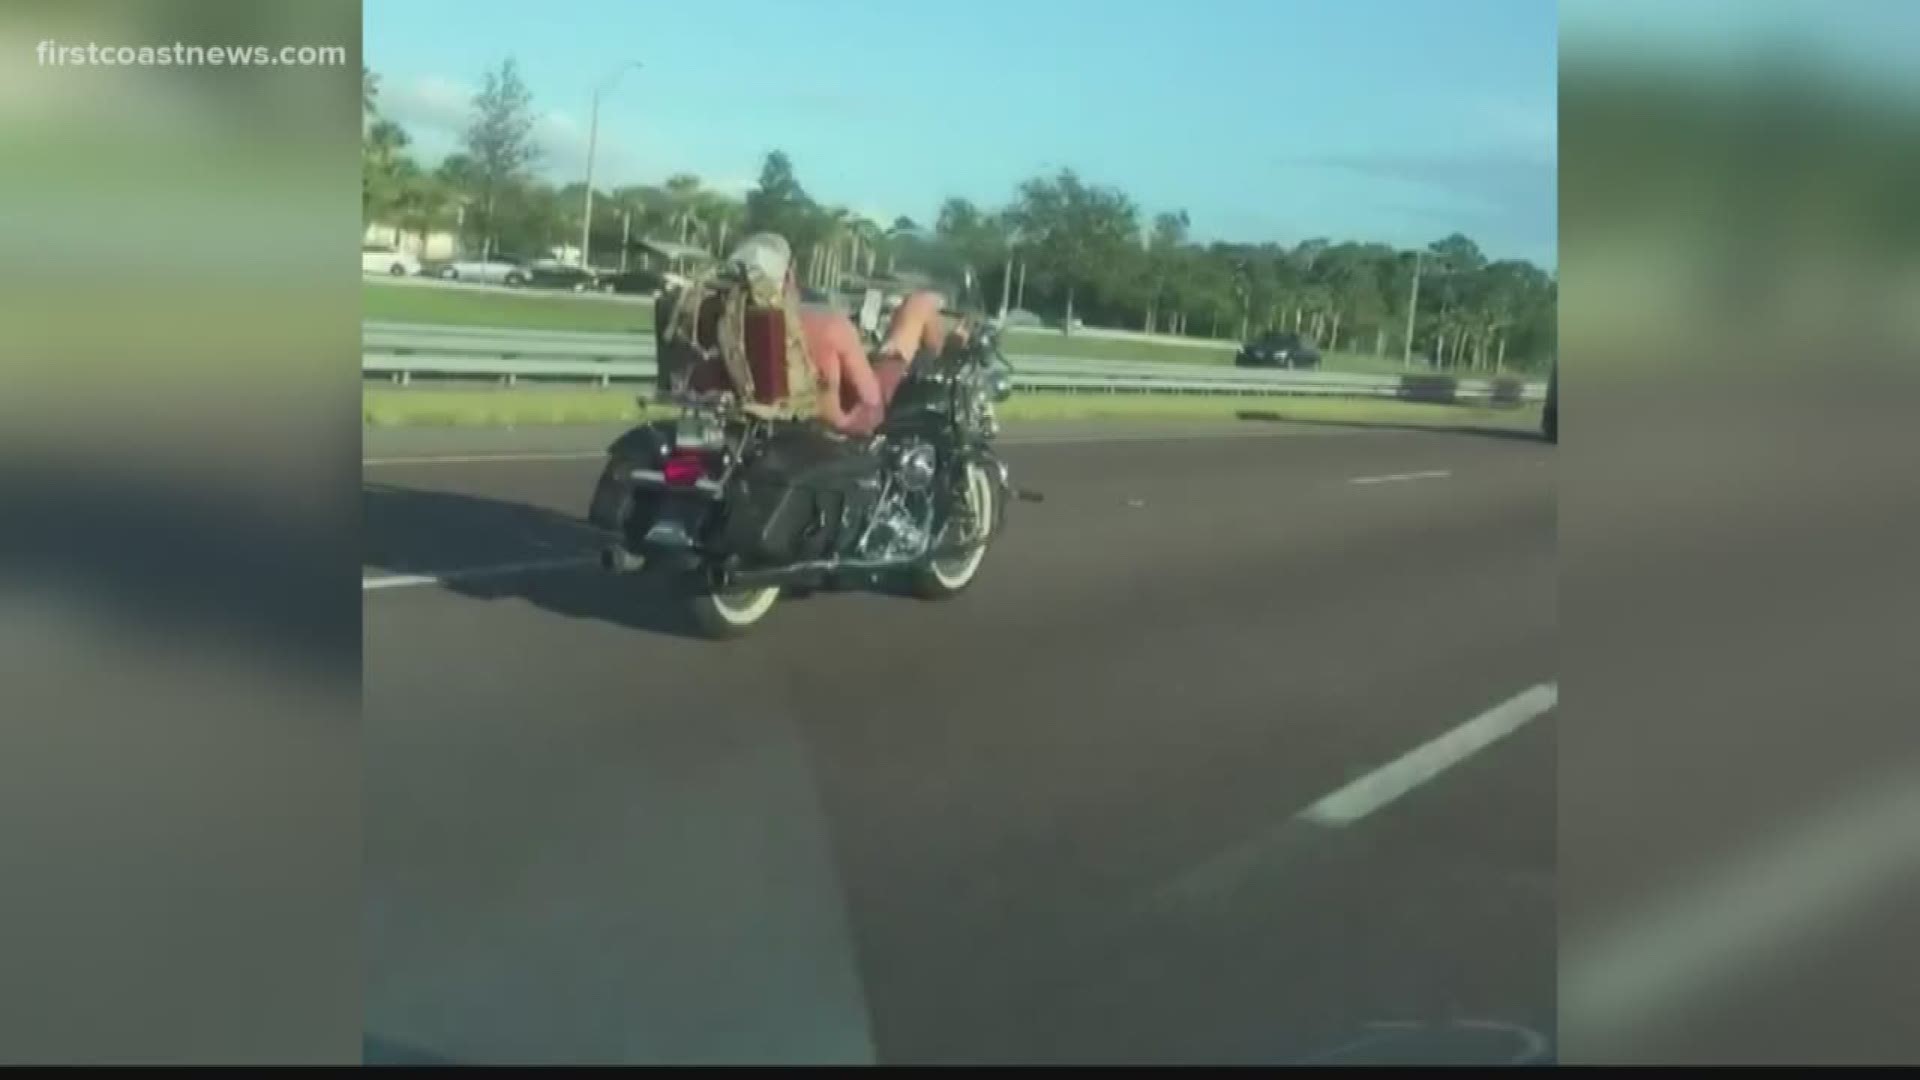 First Coast News spoke to the woman who took the video who said she was going about 60 mph when the motorcyclist surpassed her on the road.